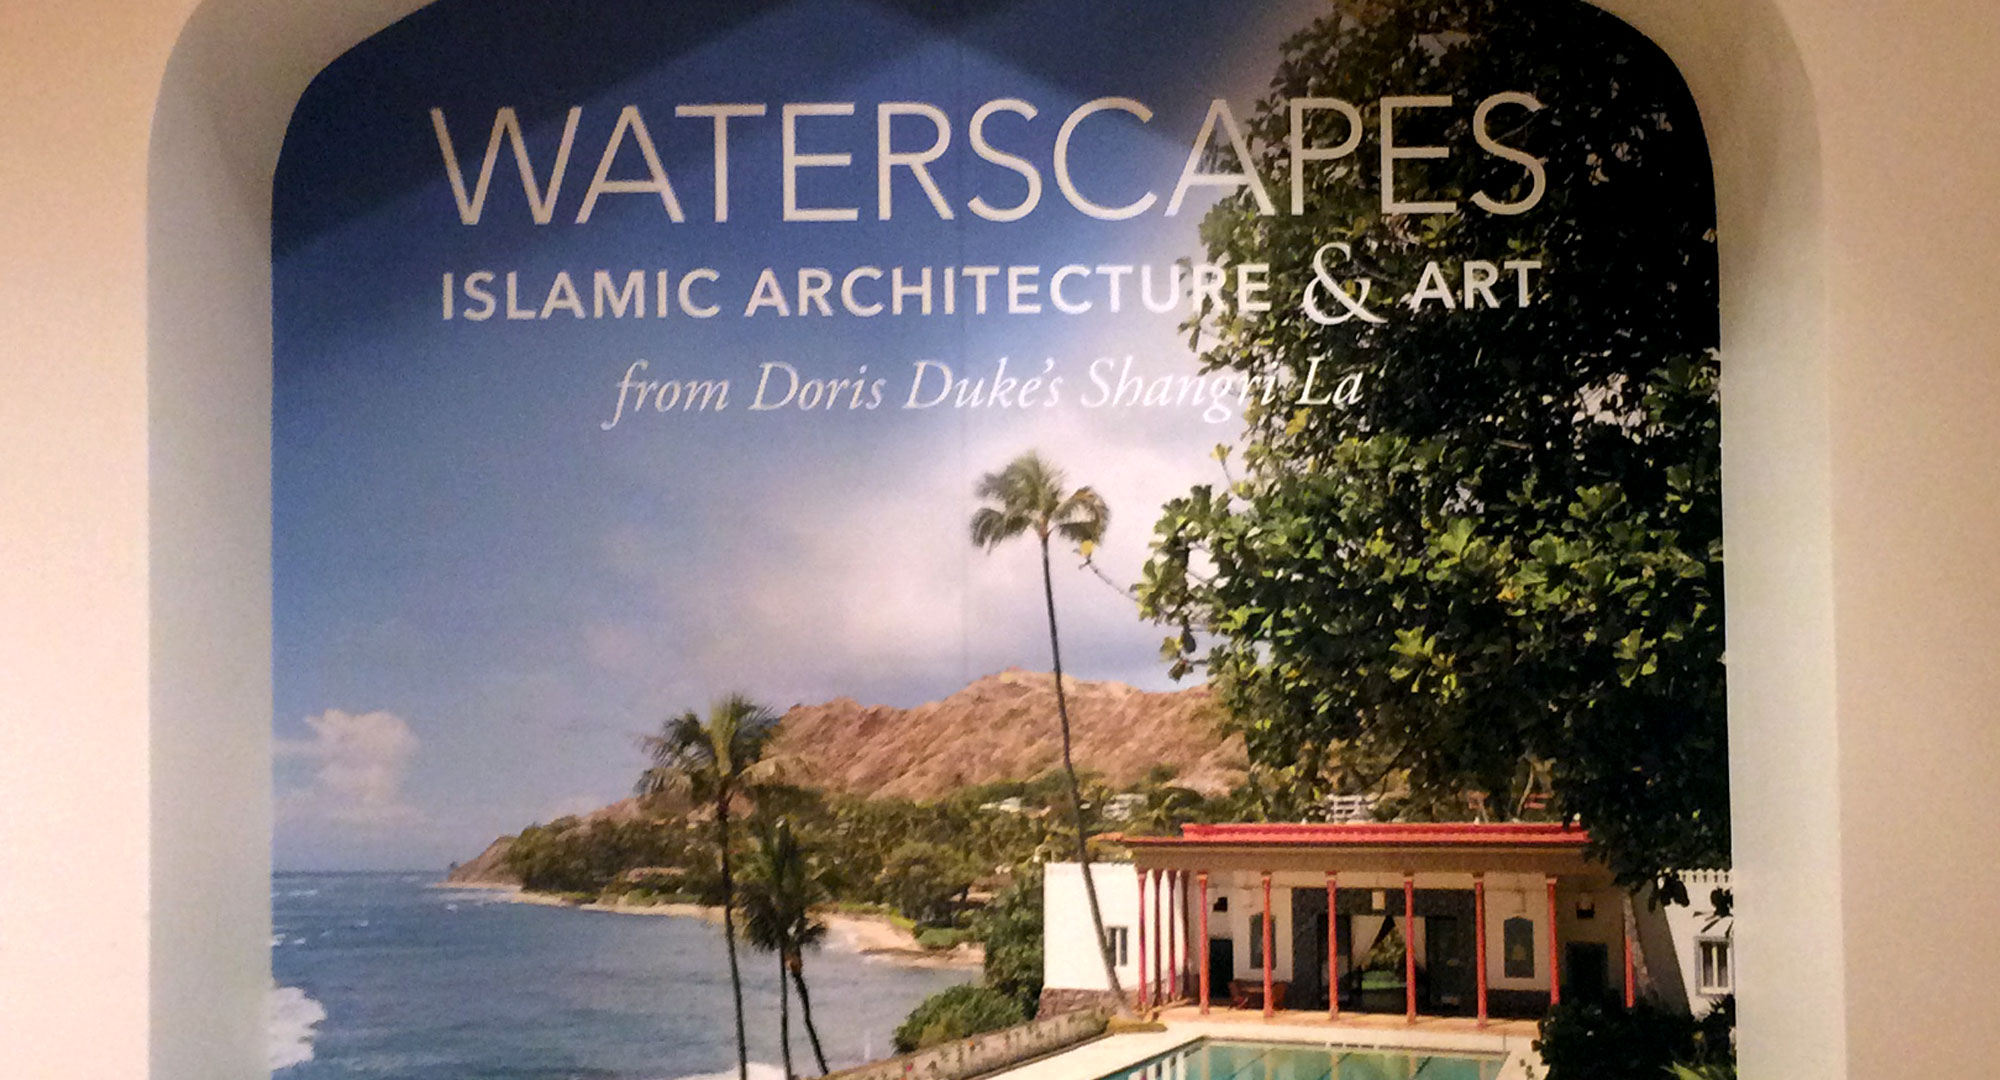 "Waterscapes; Islamic Architecture & Art; from Doris Duke's Shangri La" display sign